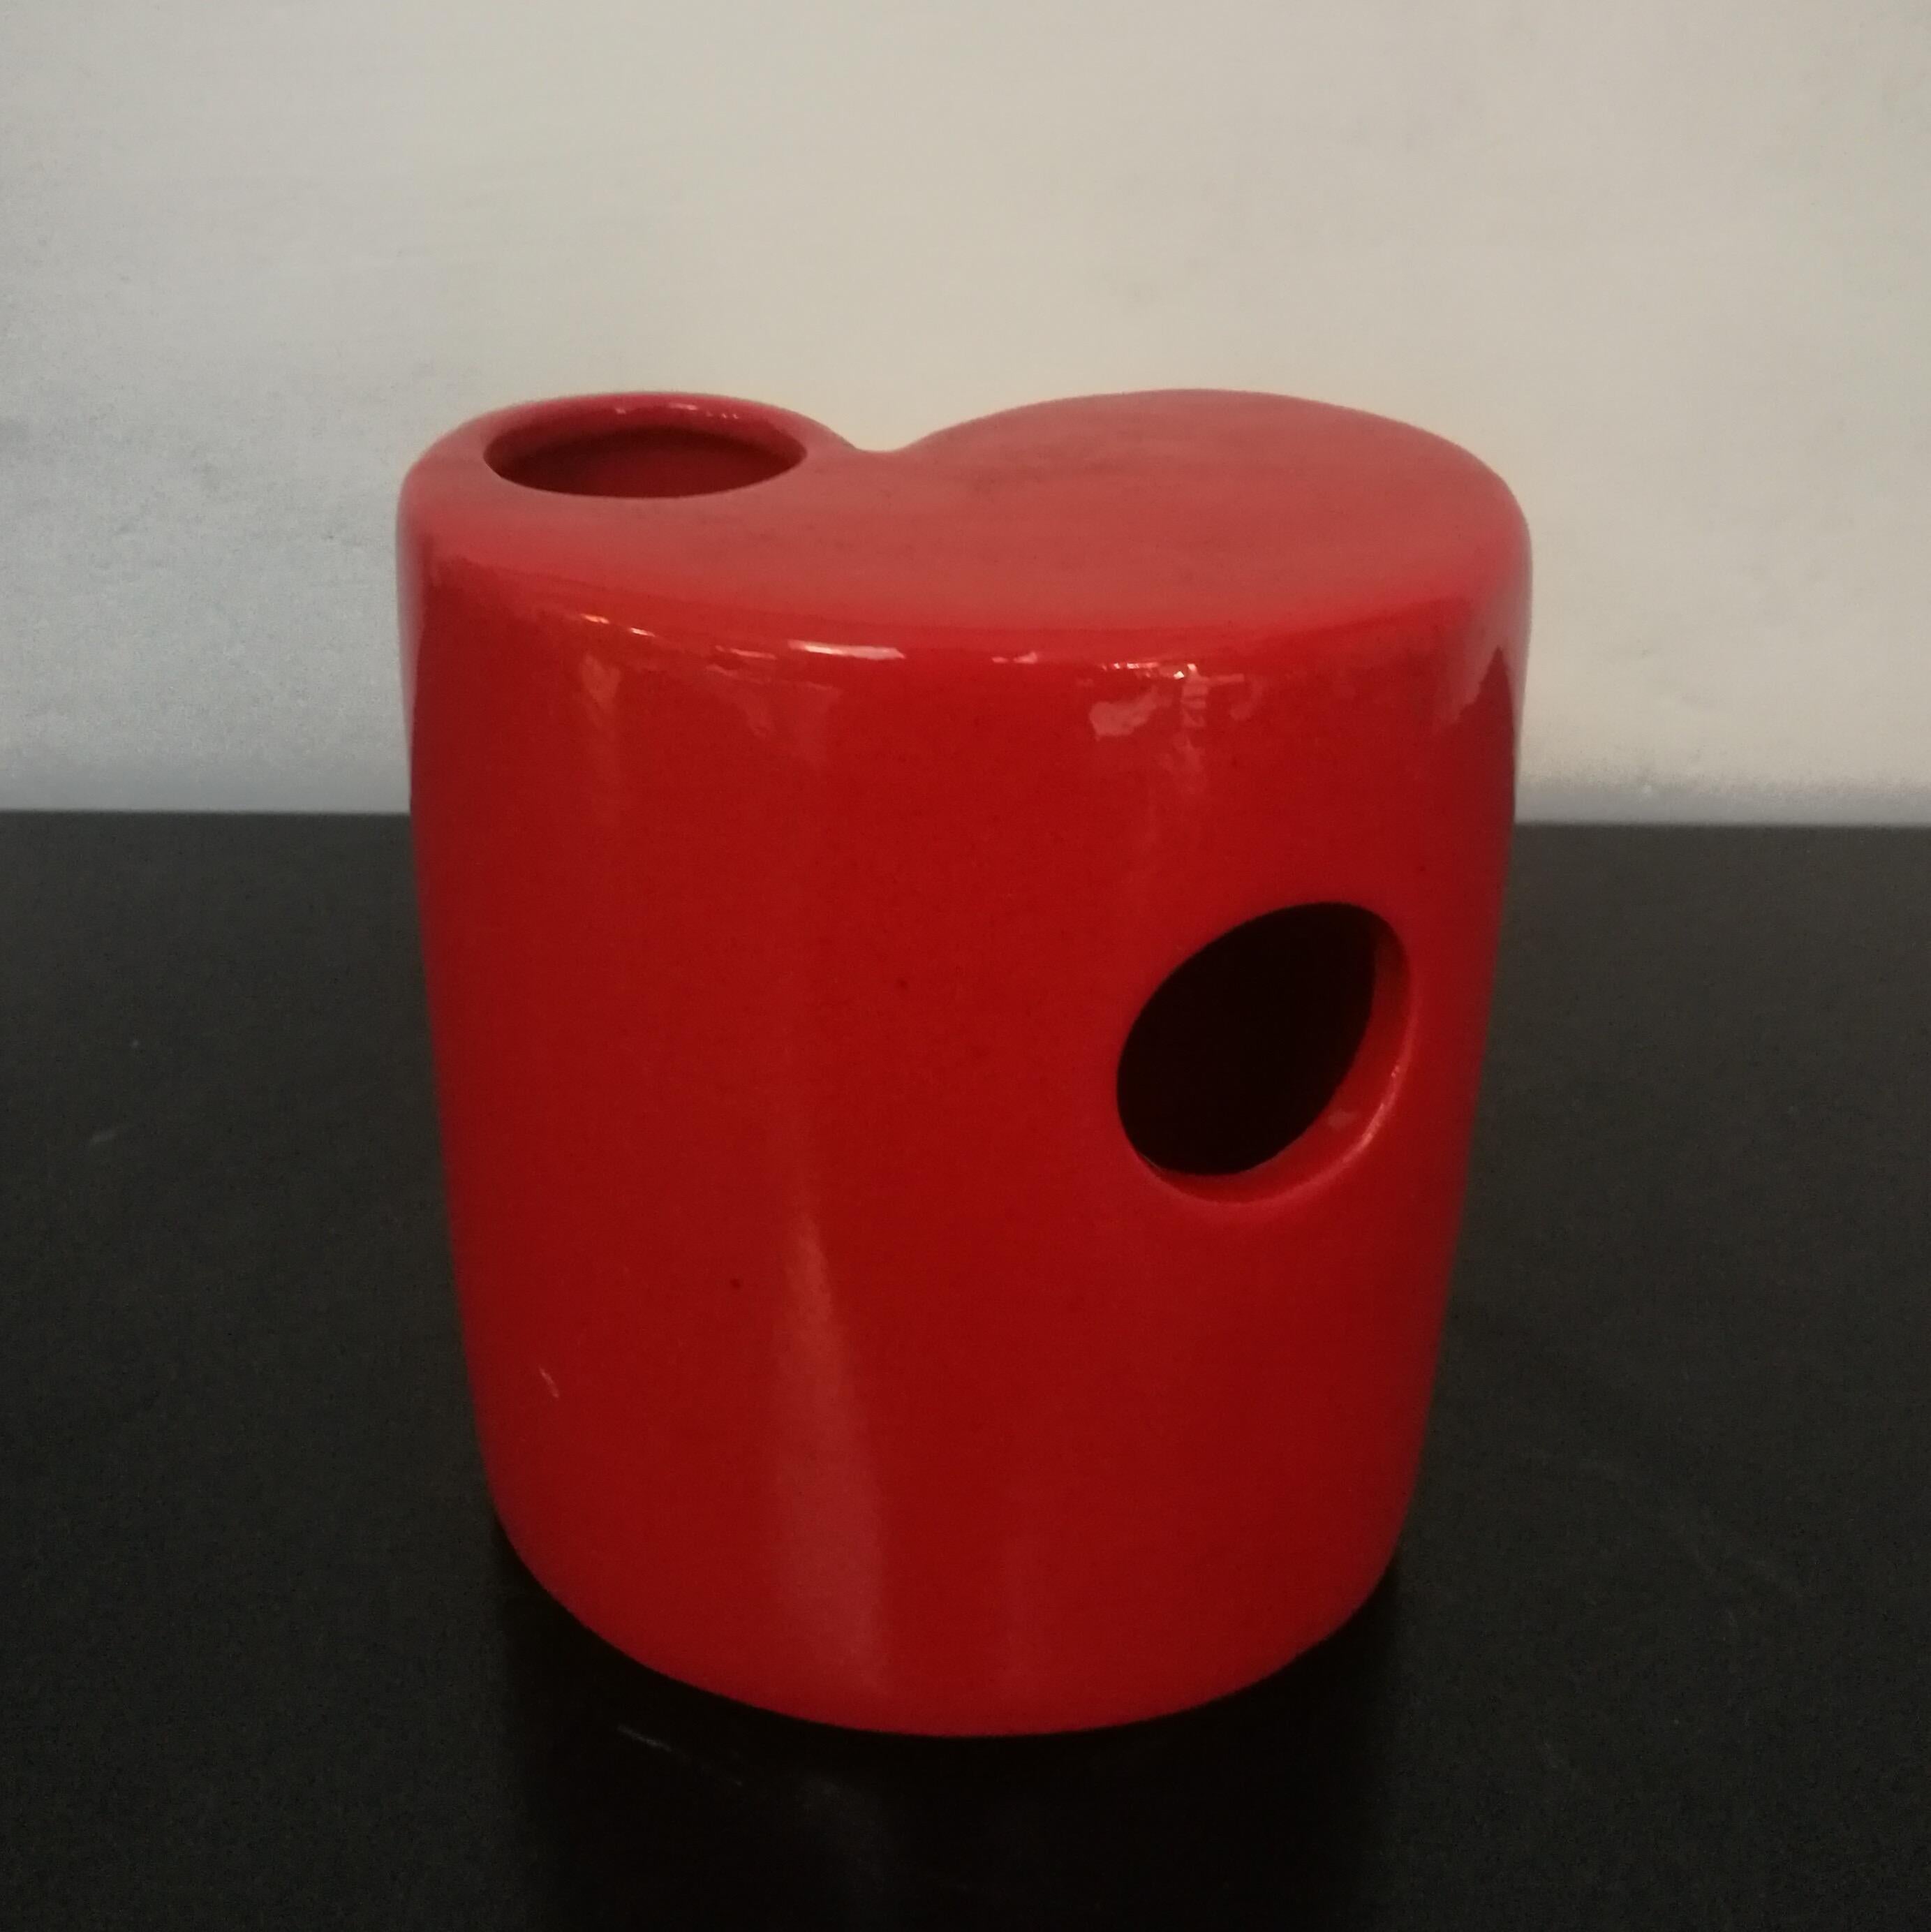 Italian red glazed ceramic vase, 1970s
Red glazed ceramic vase with hole, curved lines and very decorative
Design of the Space Age period
Excellent condition does not present any defect.